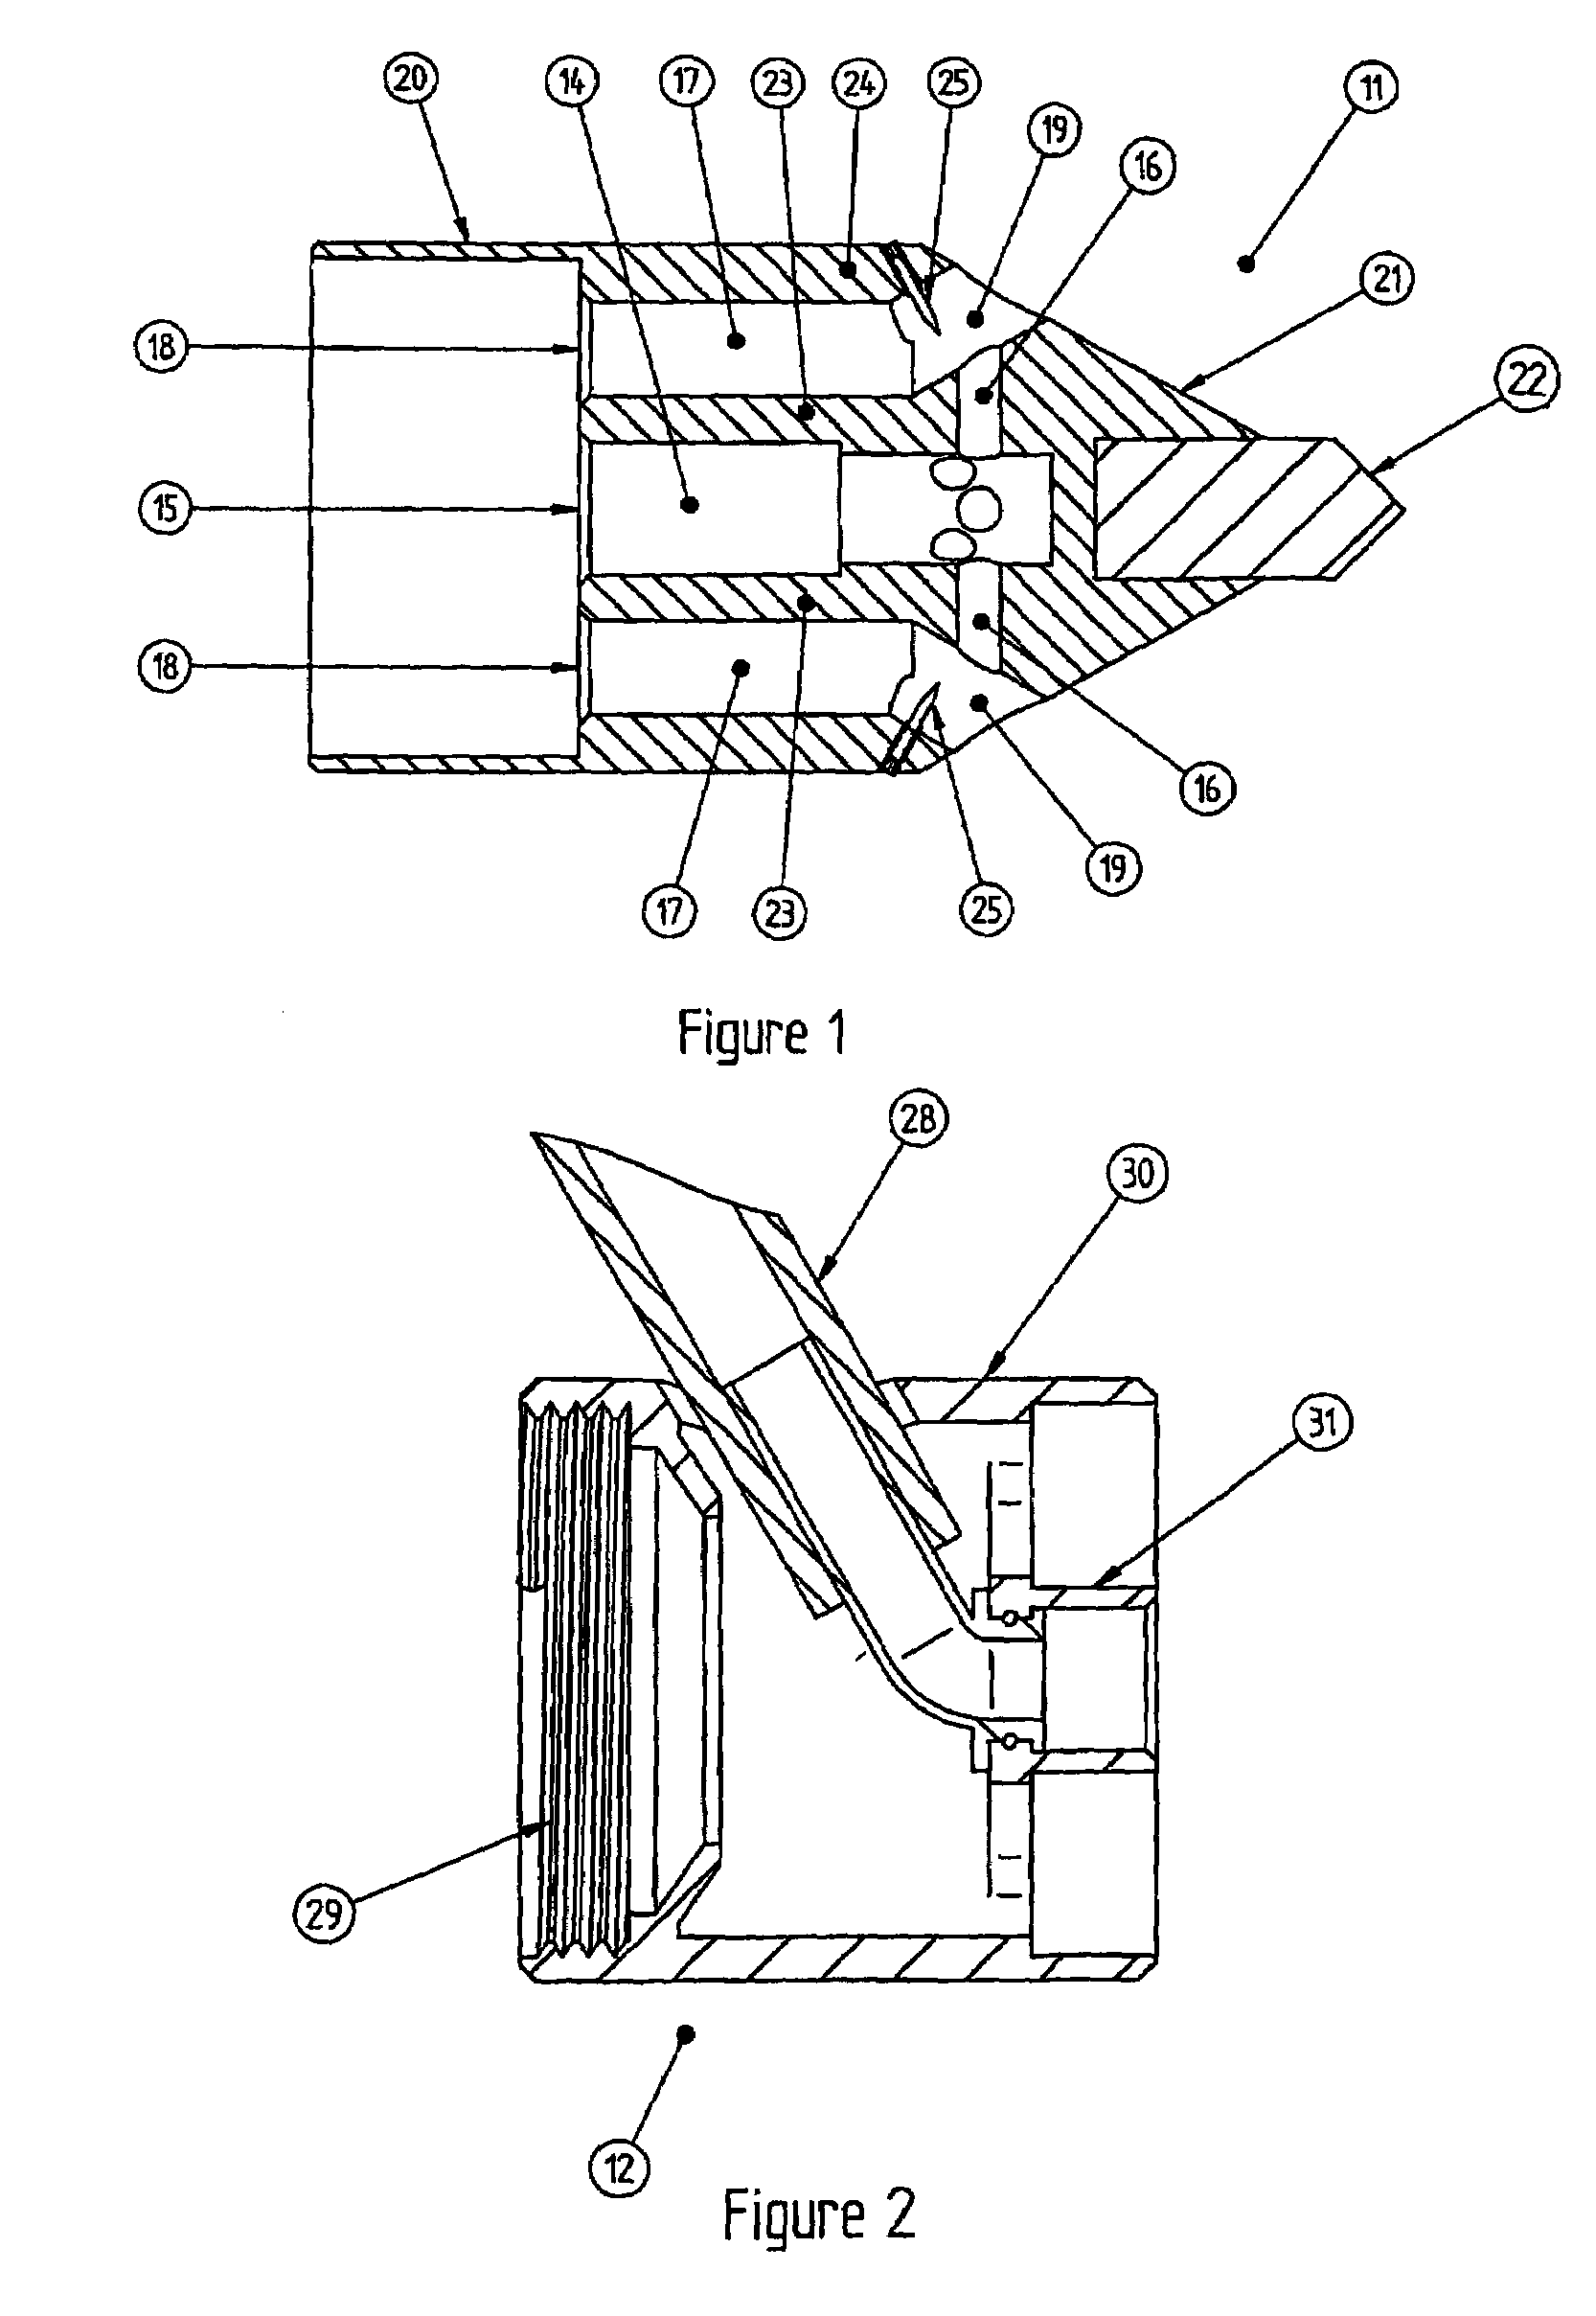 Dispersion and aeration apparatus for compressed air foam systems